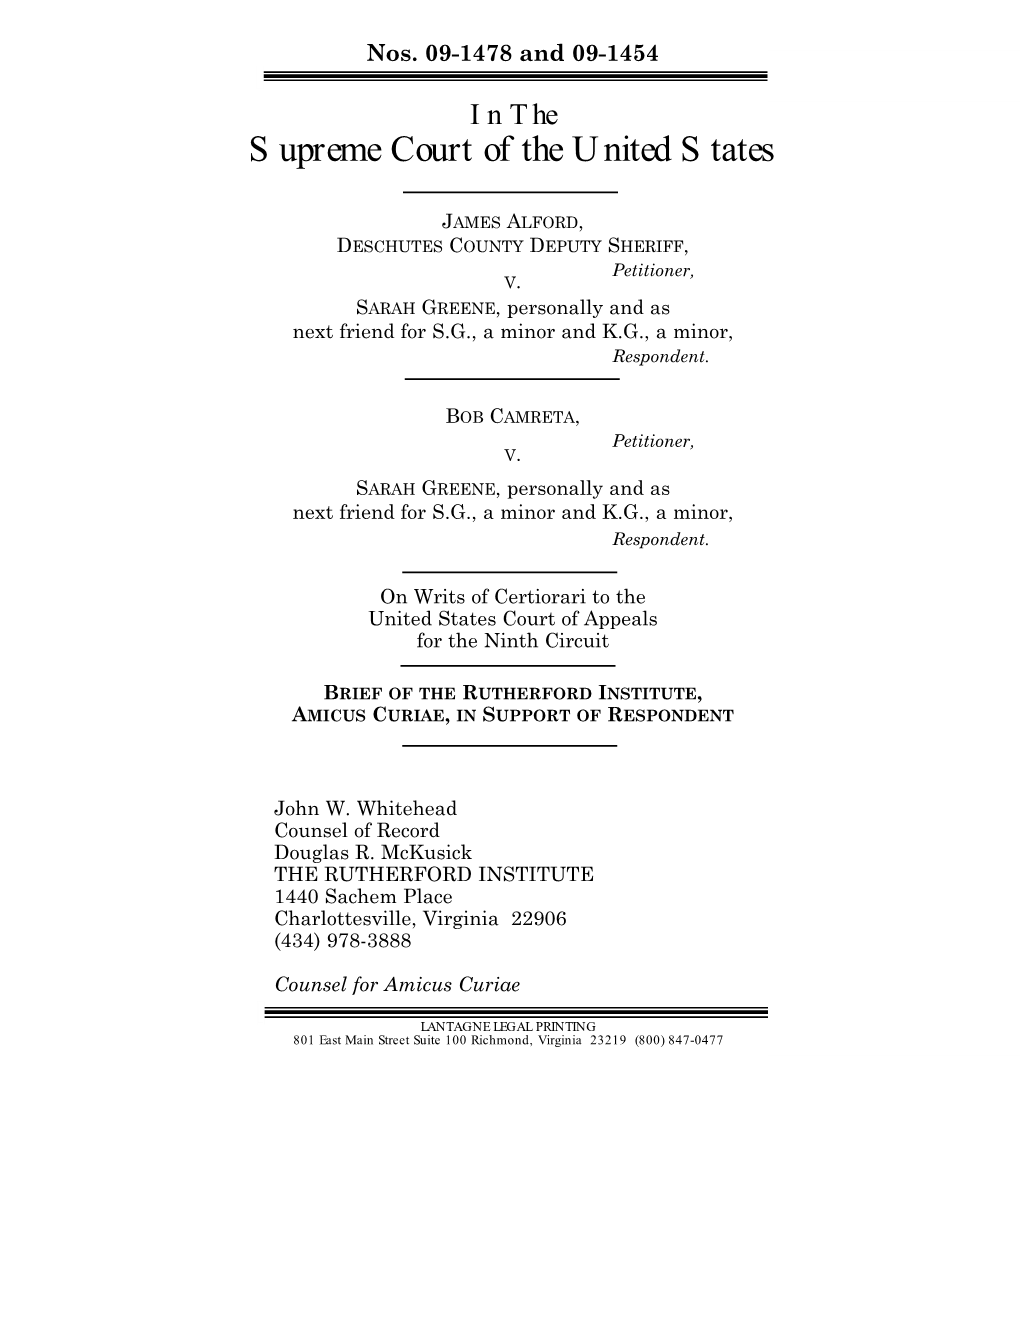 The Rutherford Institute, Amicus Curiae, in Support of Respondent